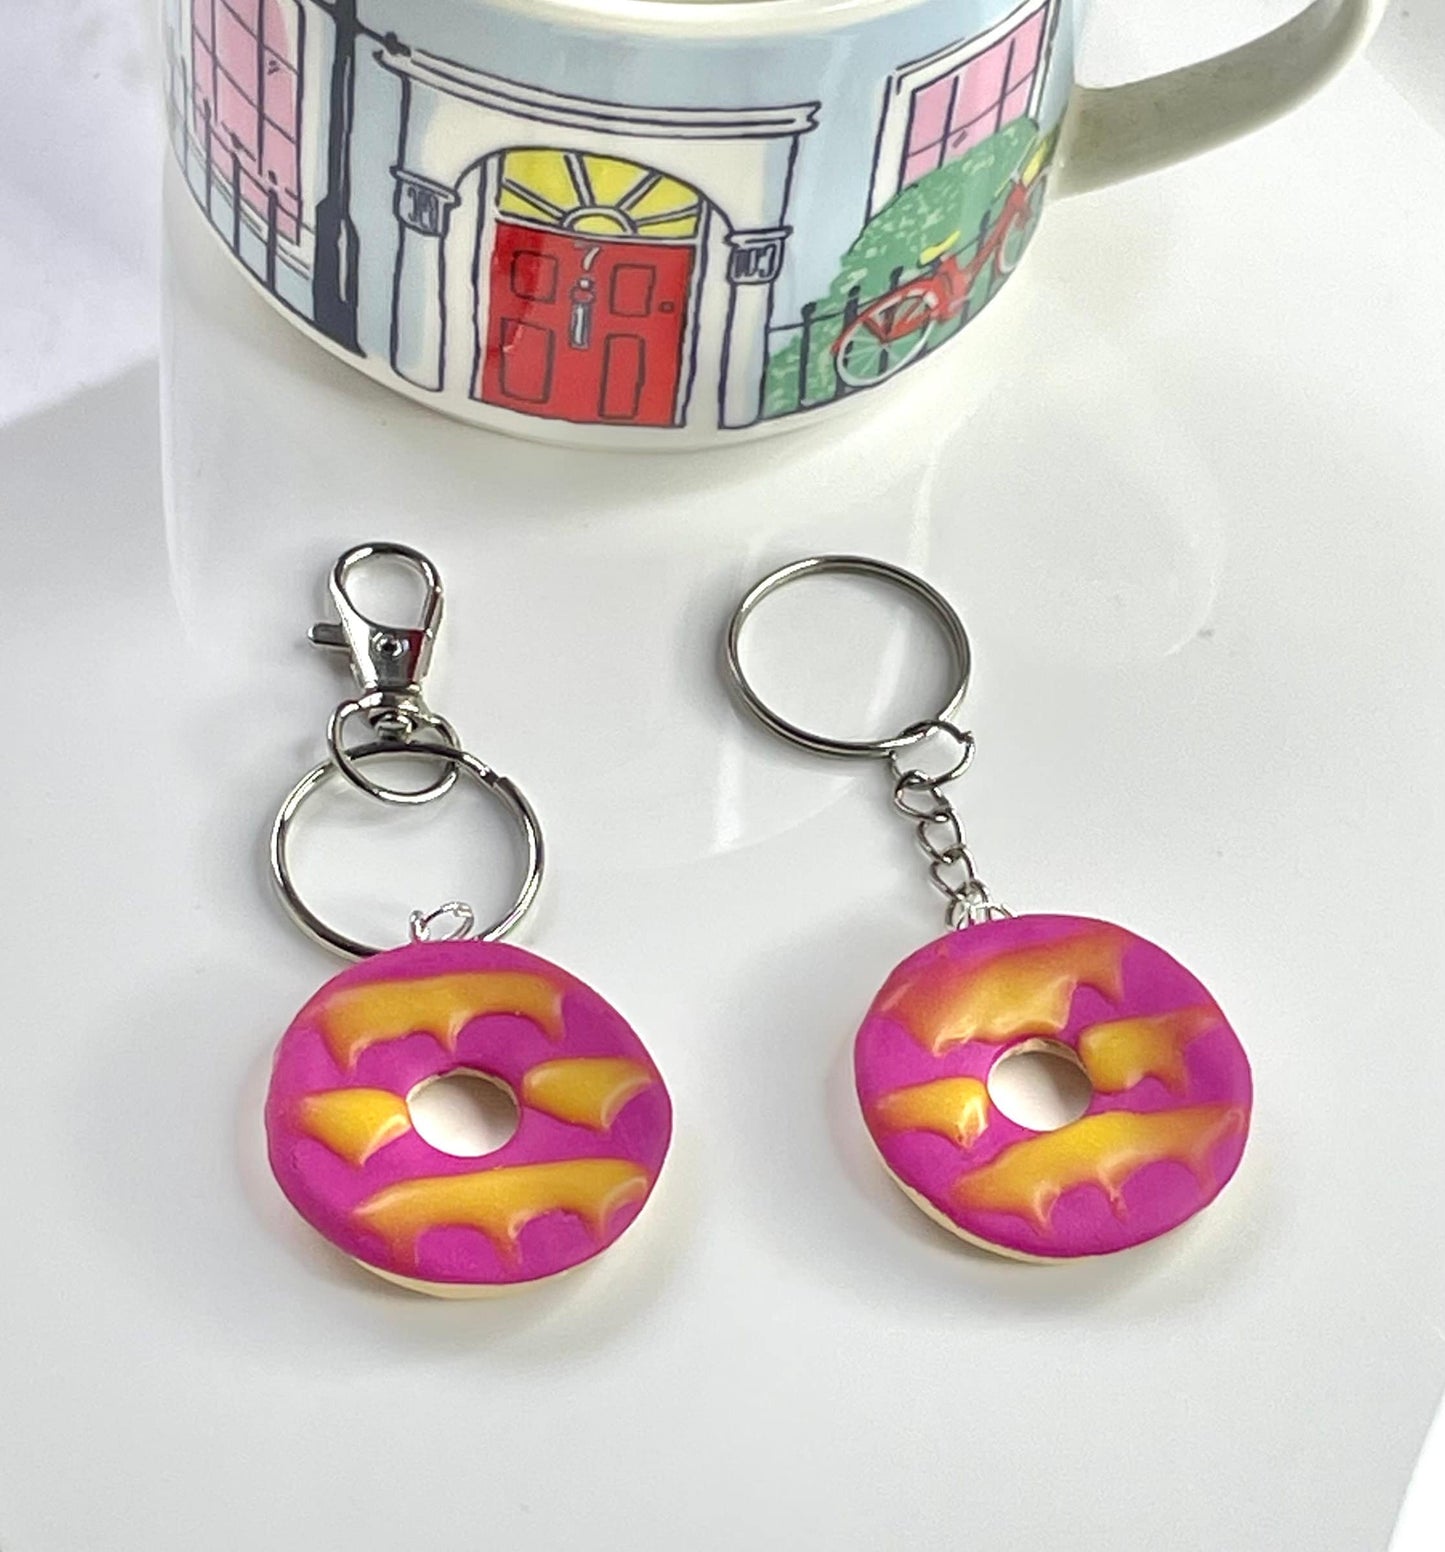 Fun Hot Pink Party Ring Biscuit Keyring Keychain